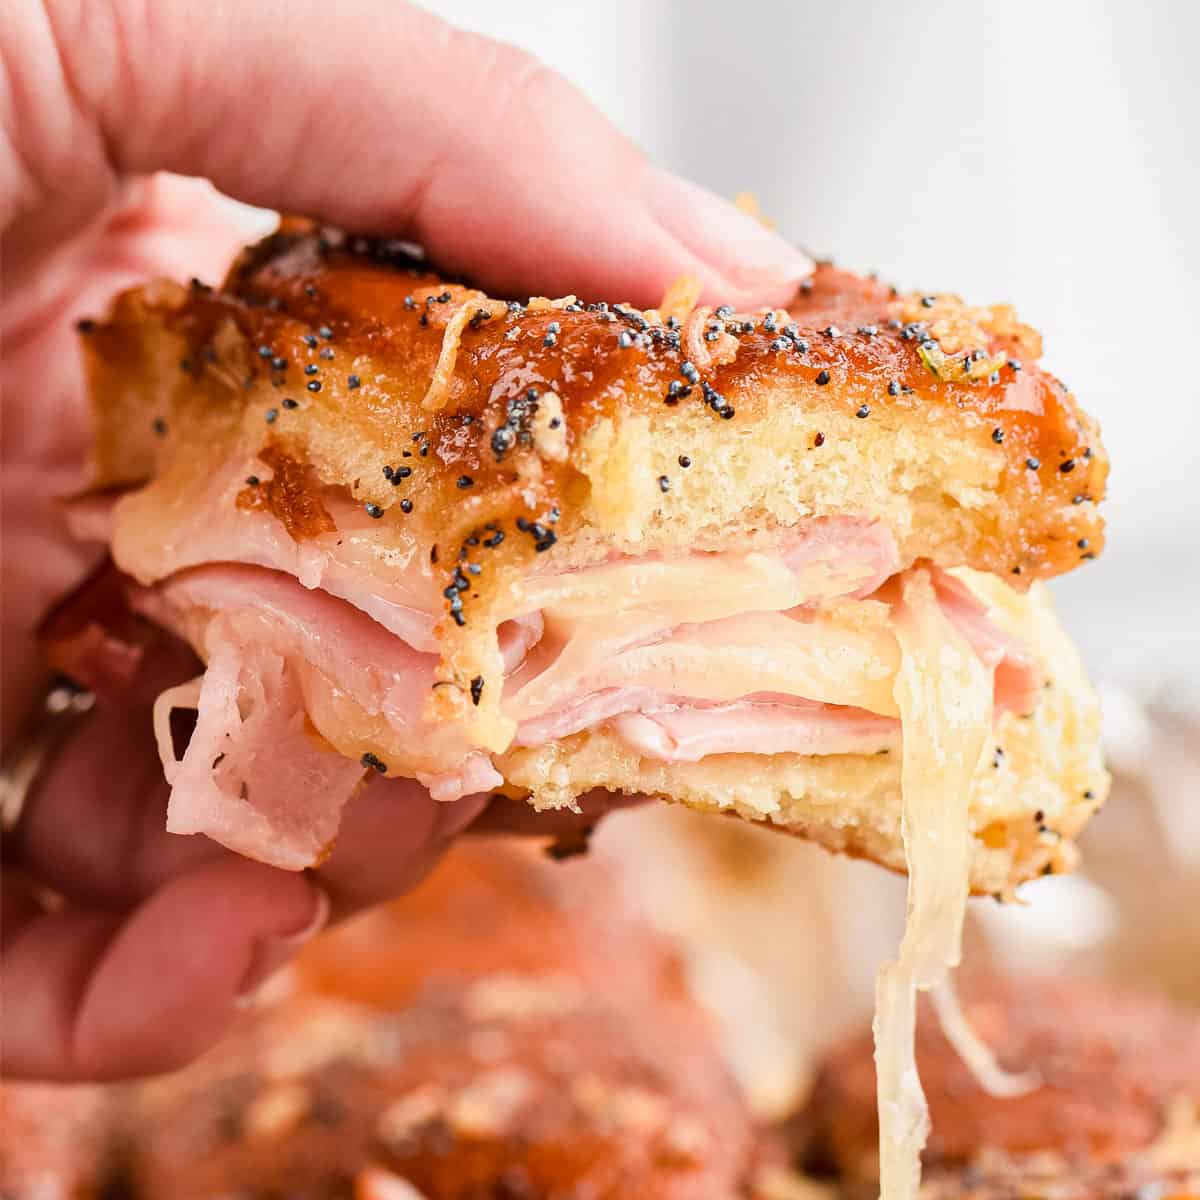 https://www.thechunkychef.com/wp-content/uploads/2022/09/Baked-Ham-and-Cheese-Sliders-recipe-card.jpg